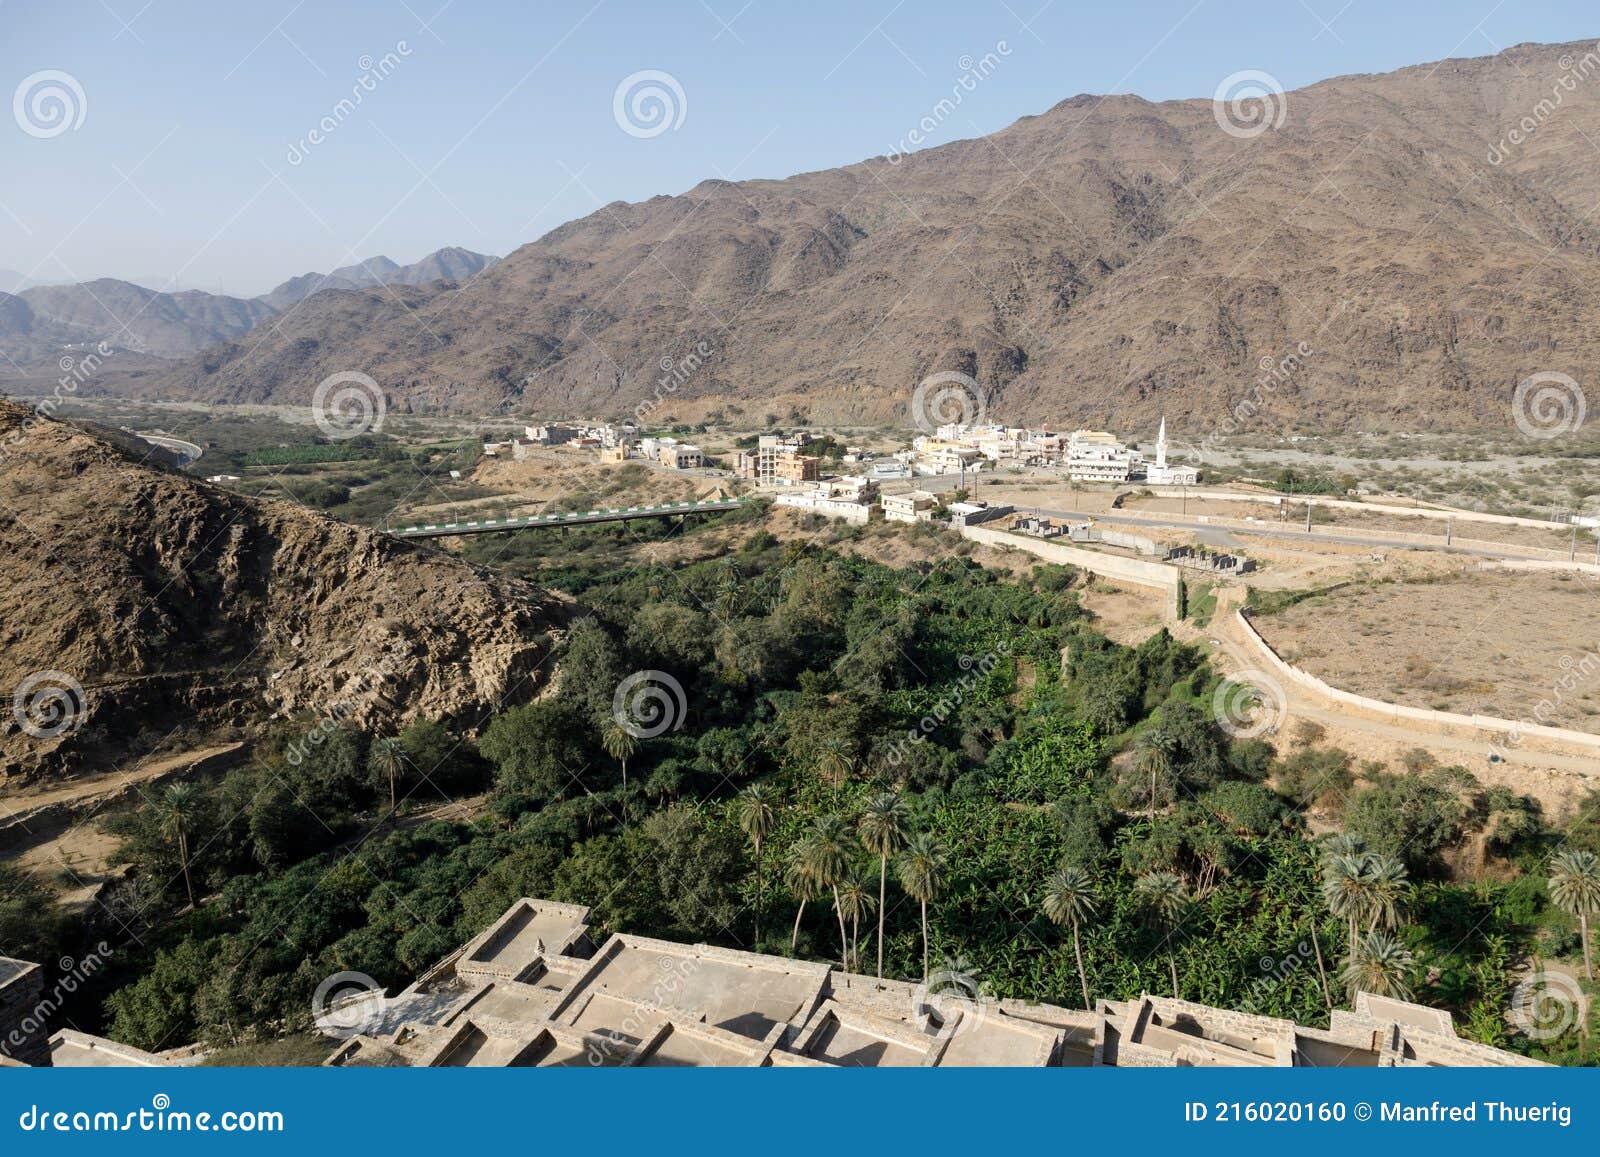 view from the thee-ain heritage site in al-baha, saudi arabia towards the village of the same name